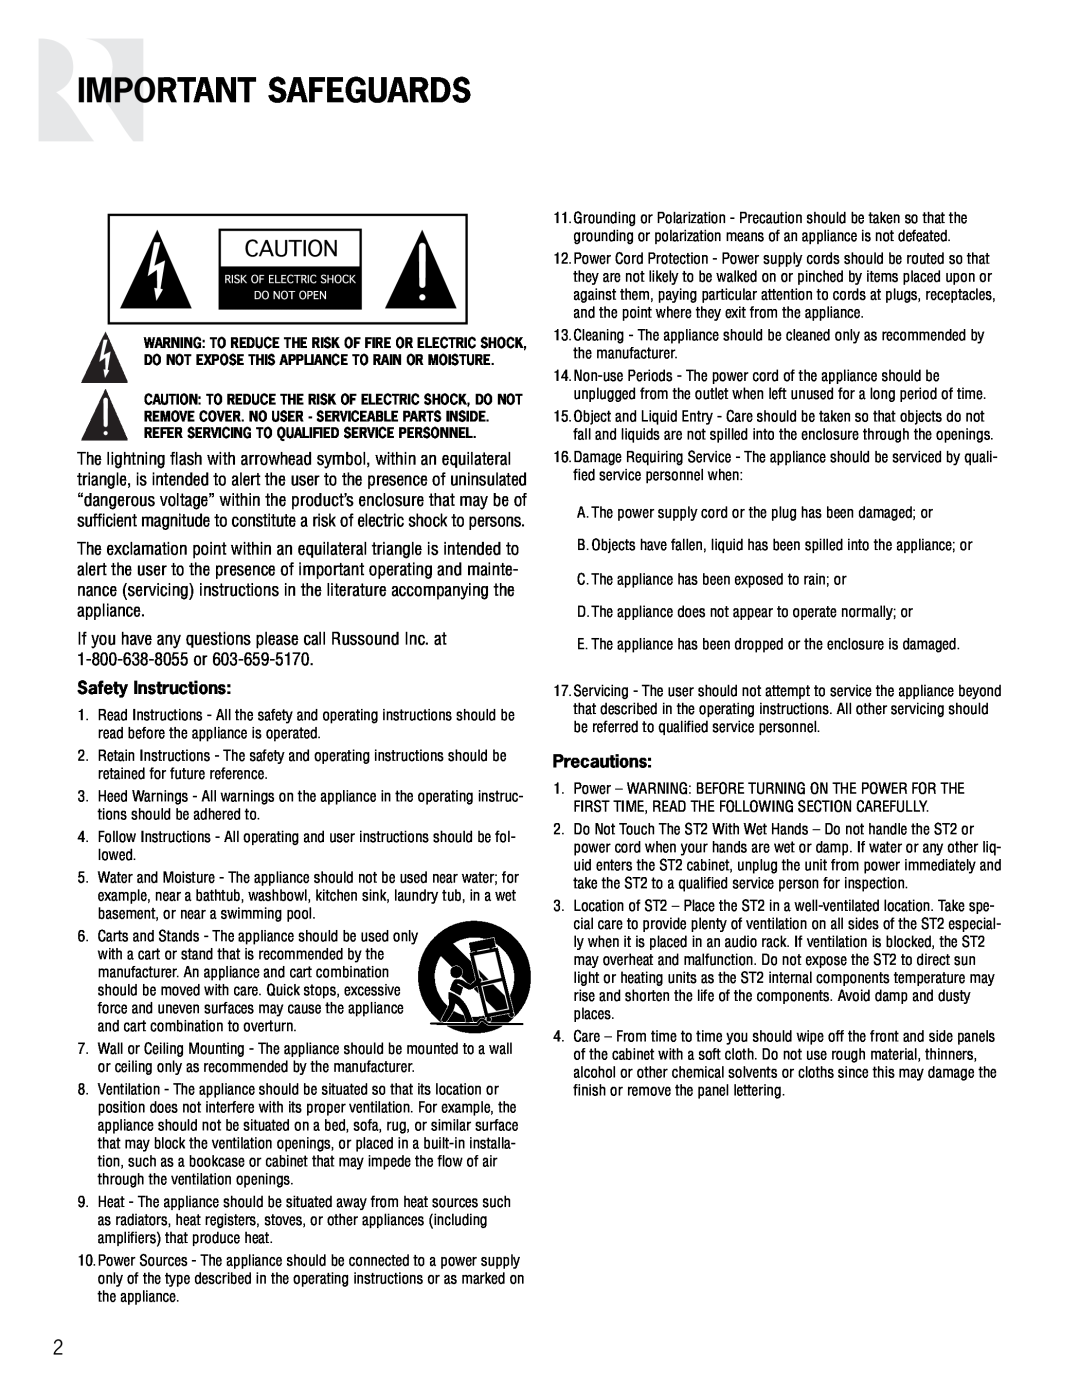 Russound ST2 instruction manual Important Safeguards, Safety Instructions, Precautions 